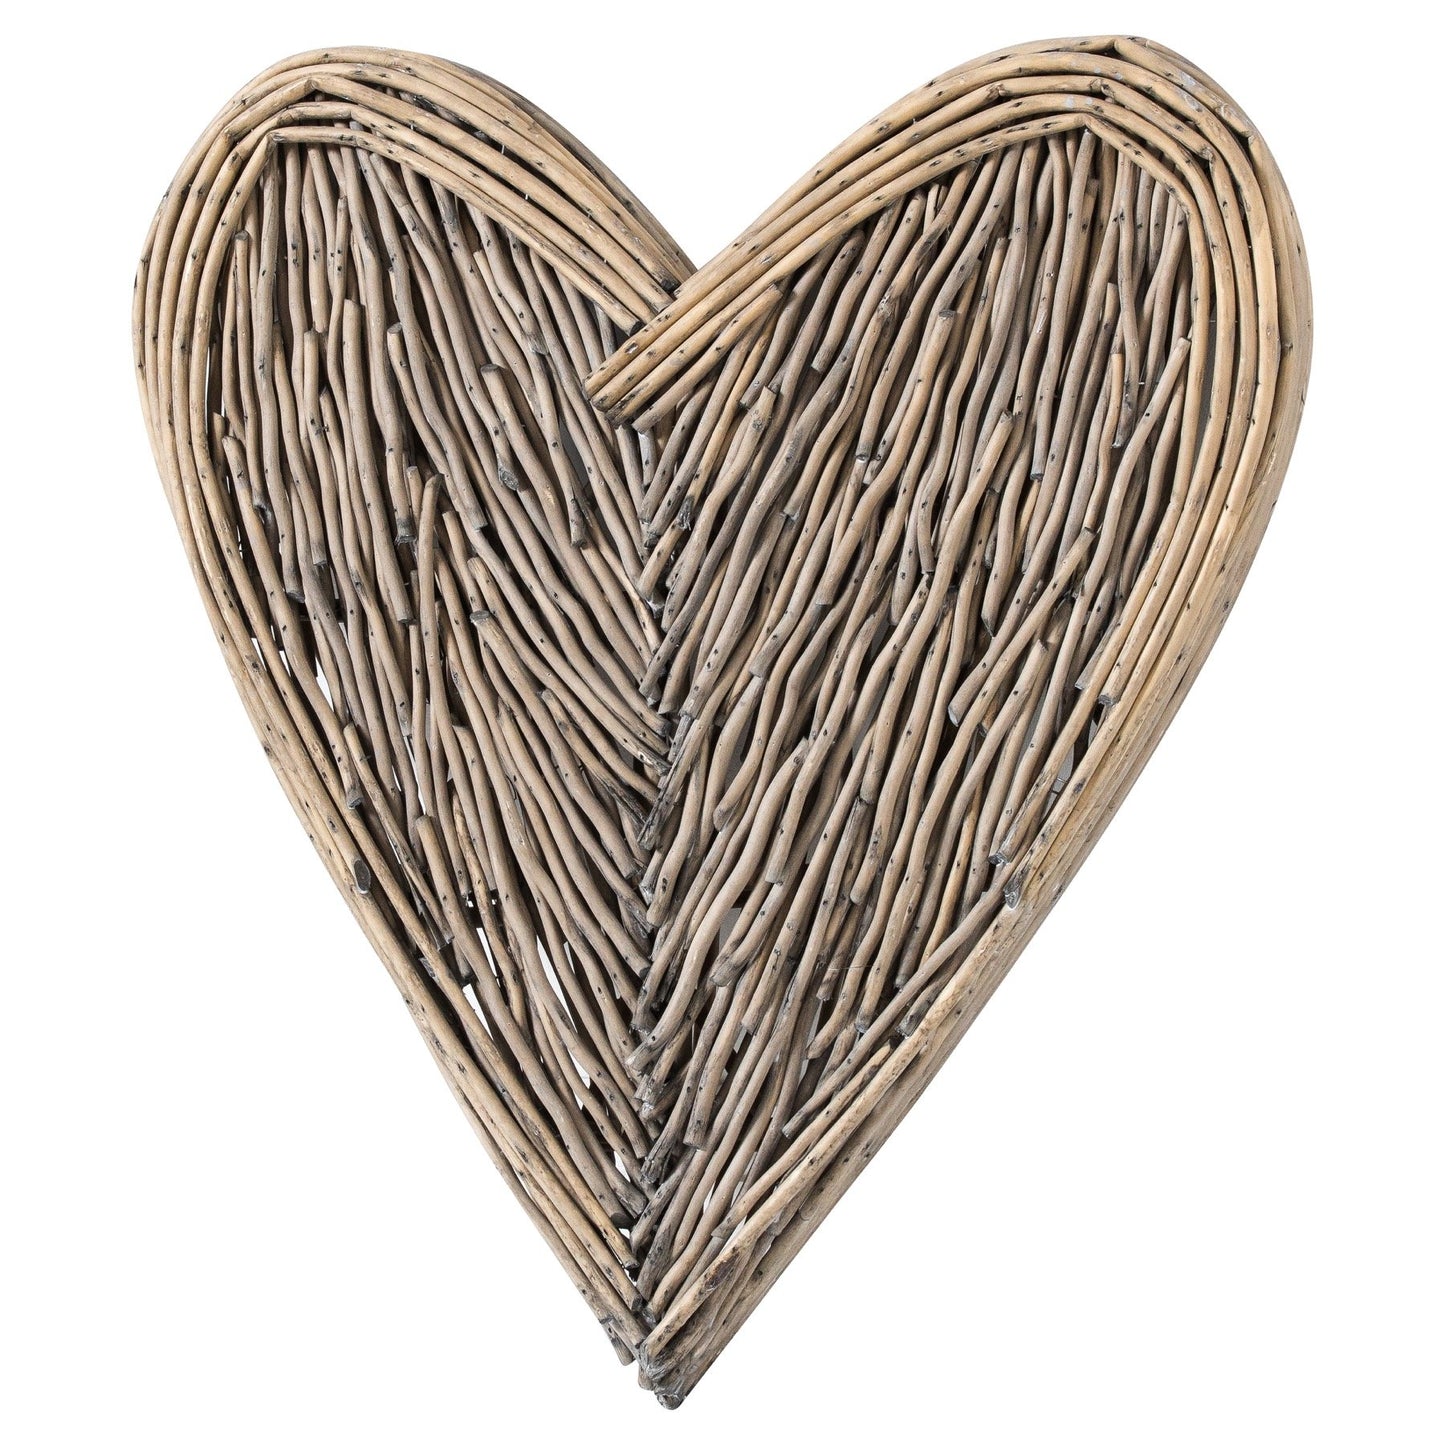 Small Willow Branch Heart